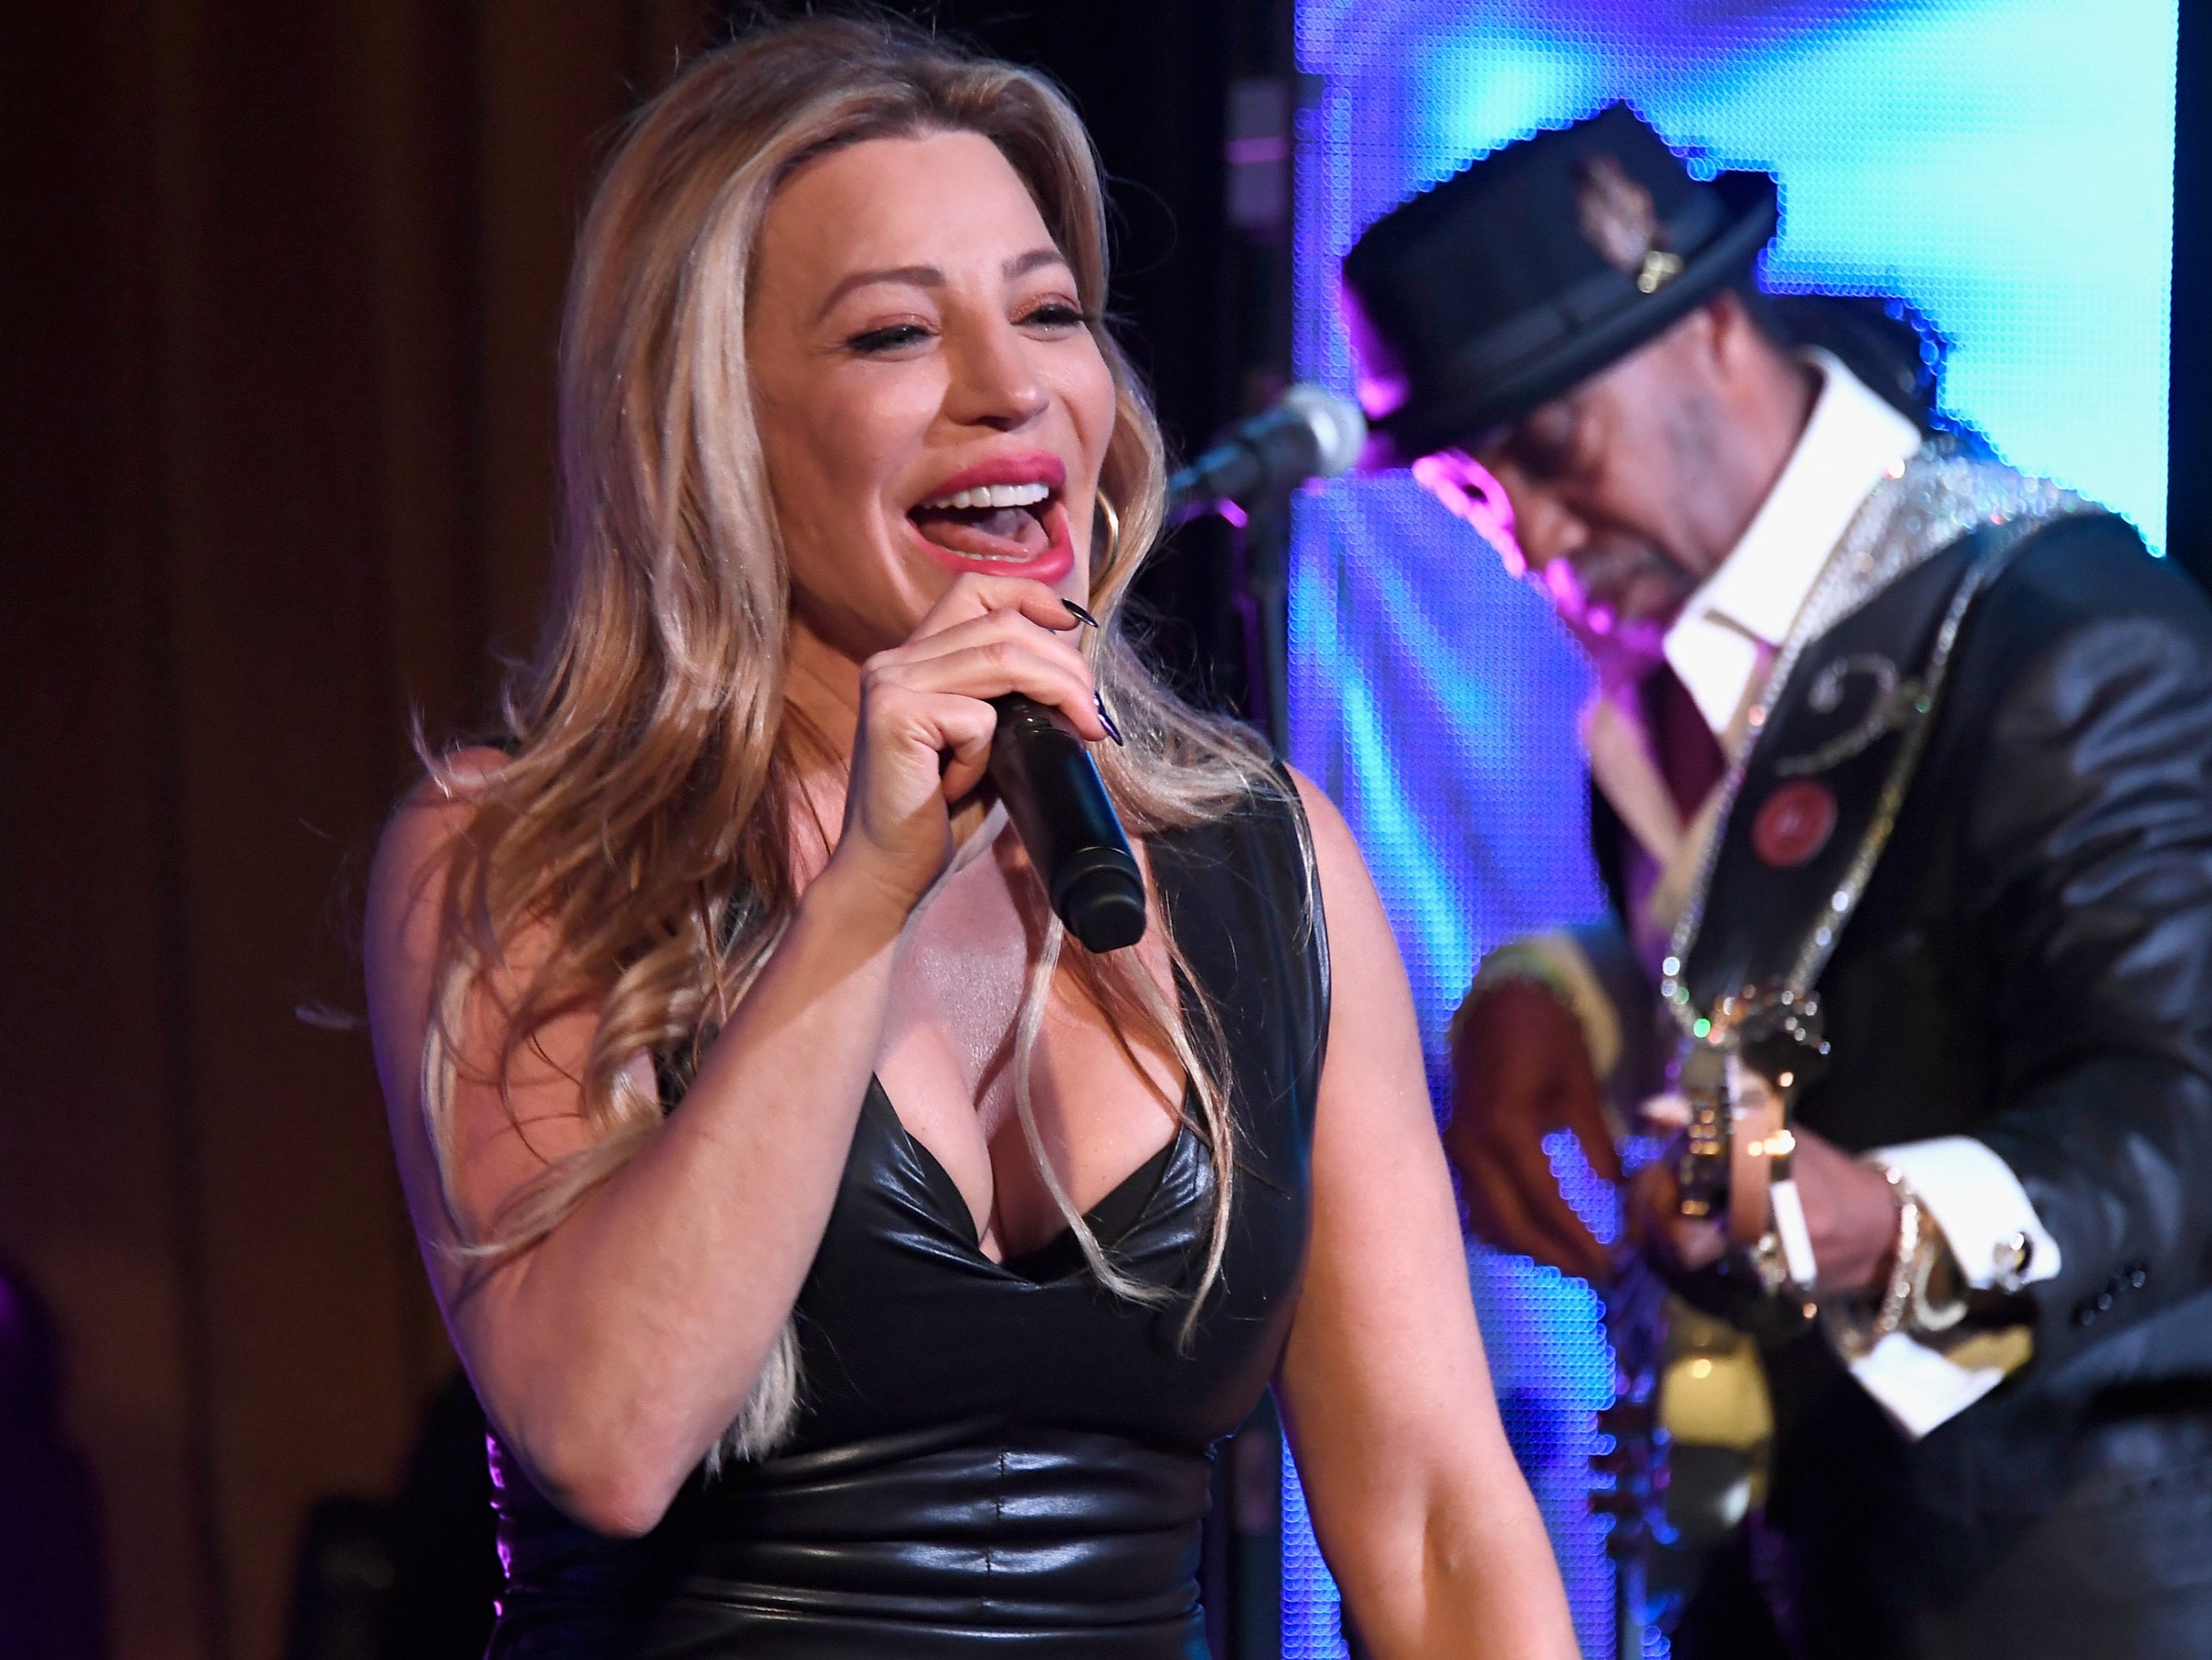 Taylor Dayne defends Mar-a-Lago New Year’s Eve performance